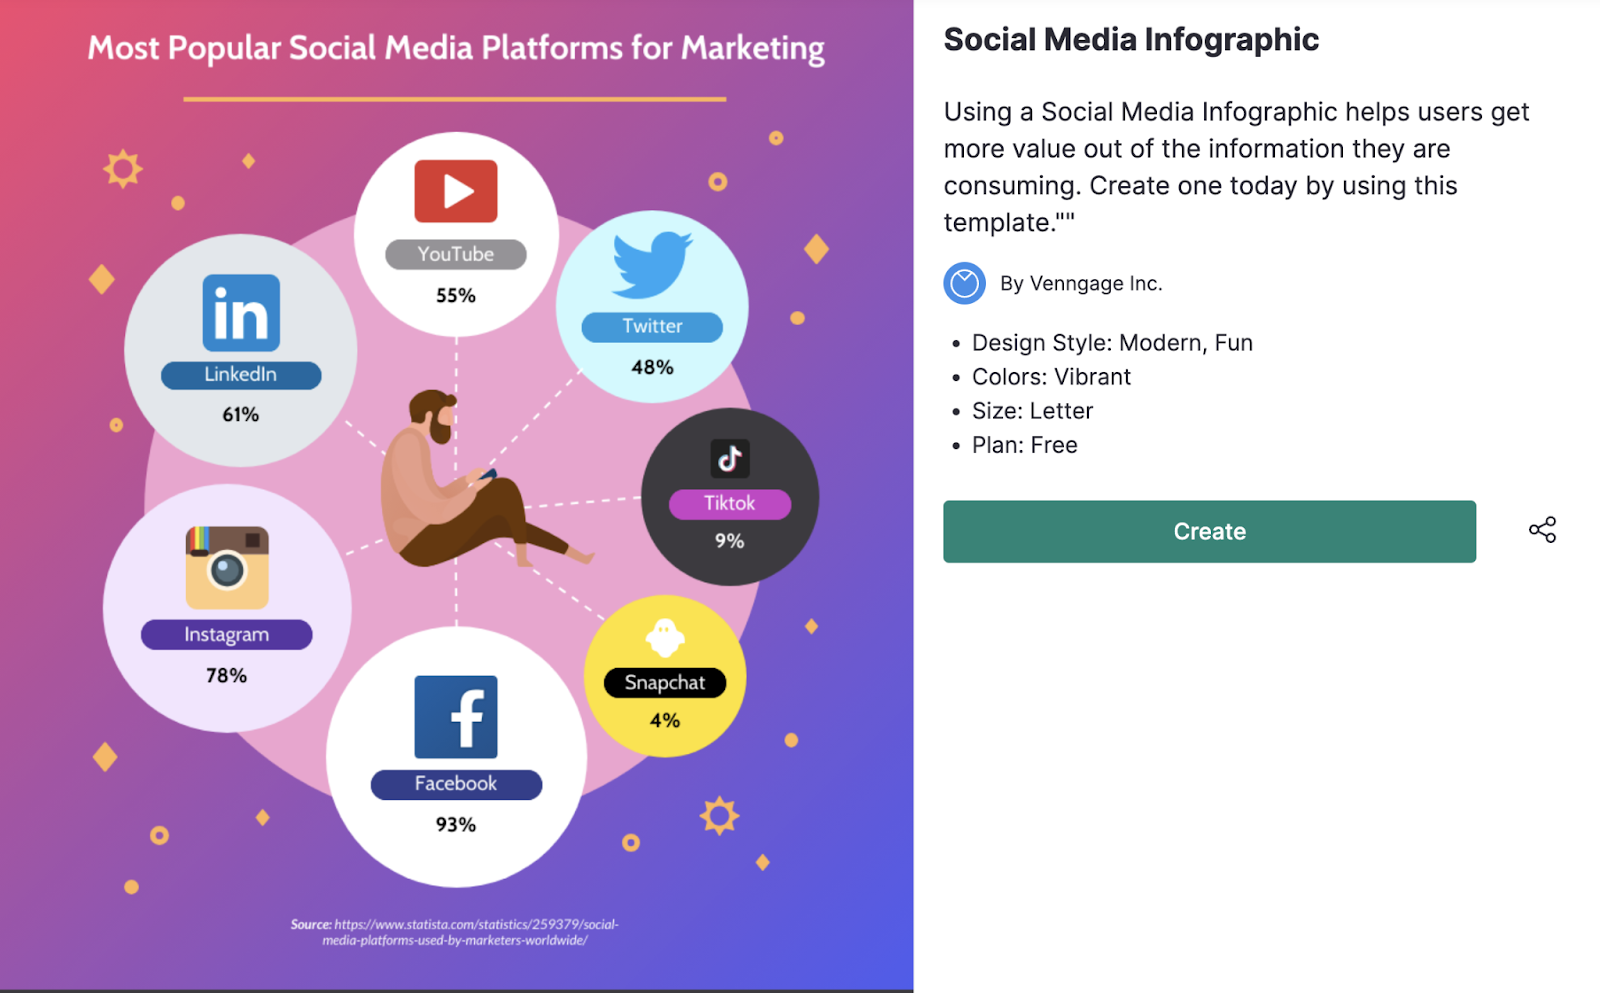 Venngage created social media infographic of the most popular social media platforms for marketing.